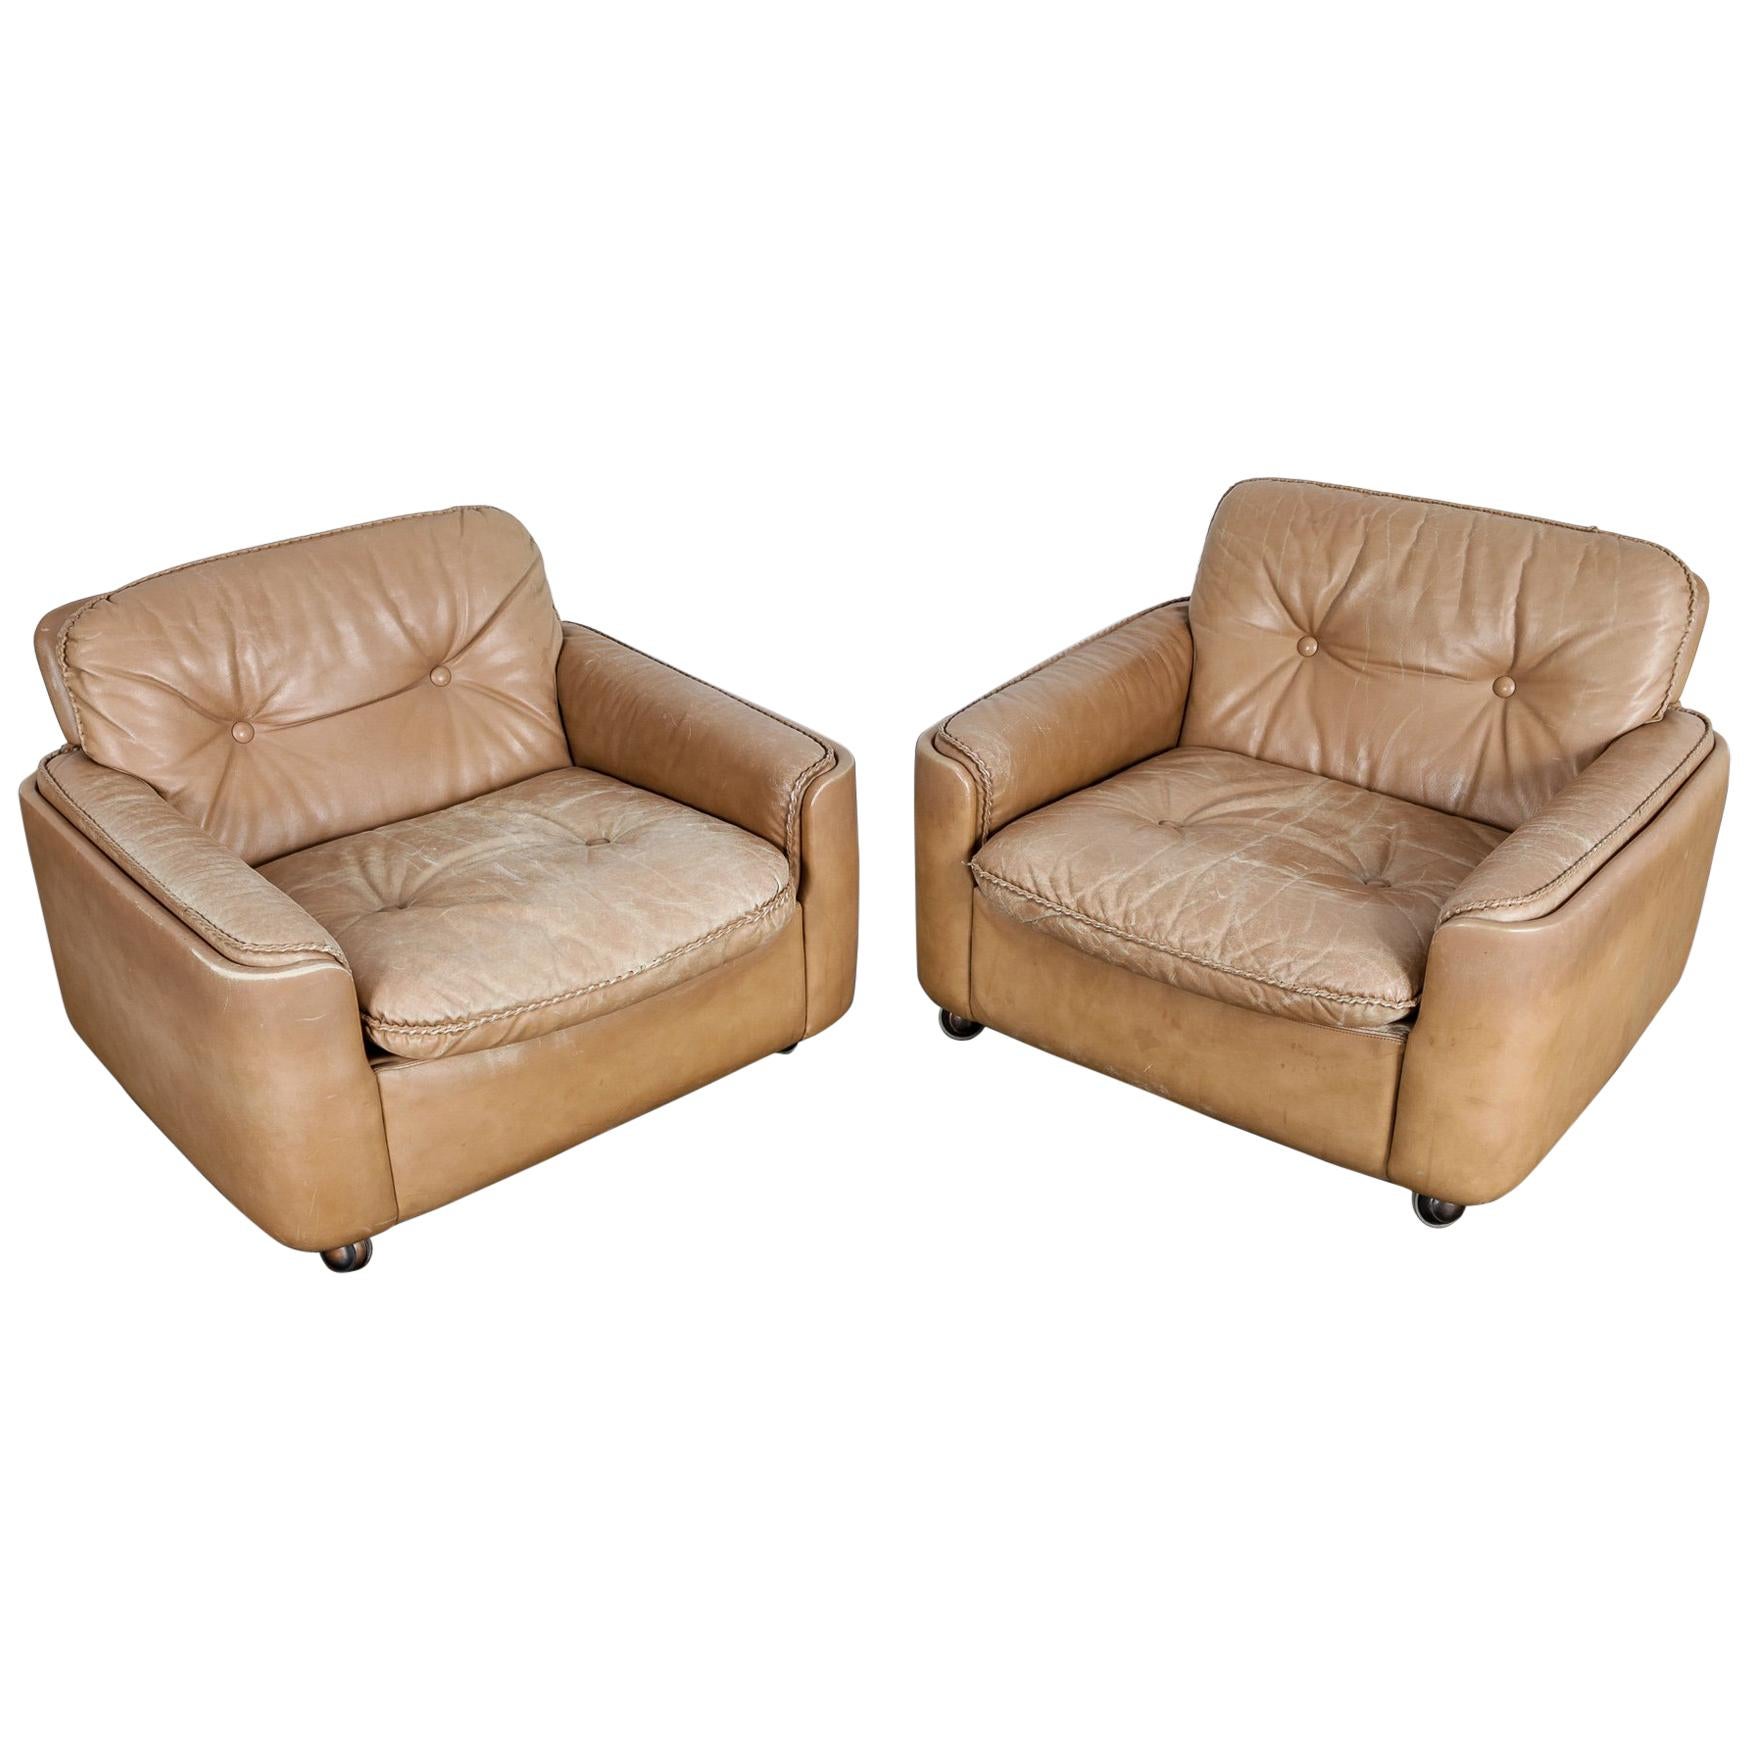 Pair of Tan Leather Low Lounge Chairs by Sigurd Ressell for Vatne Mobler, Norway For Sale